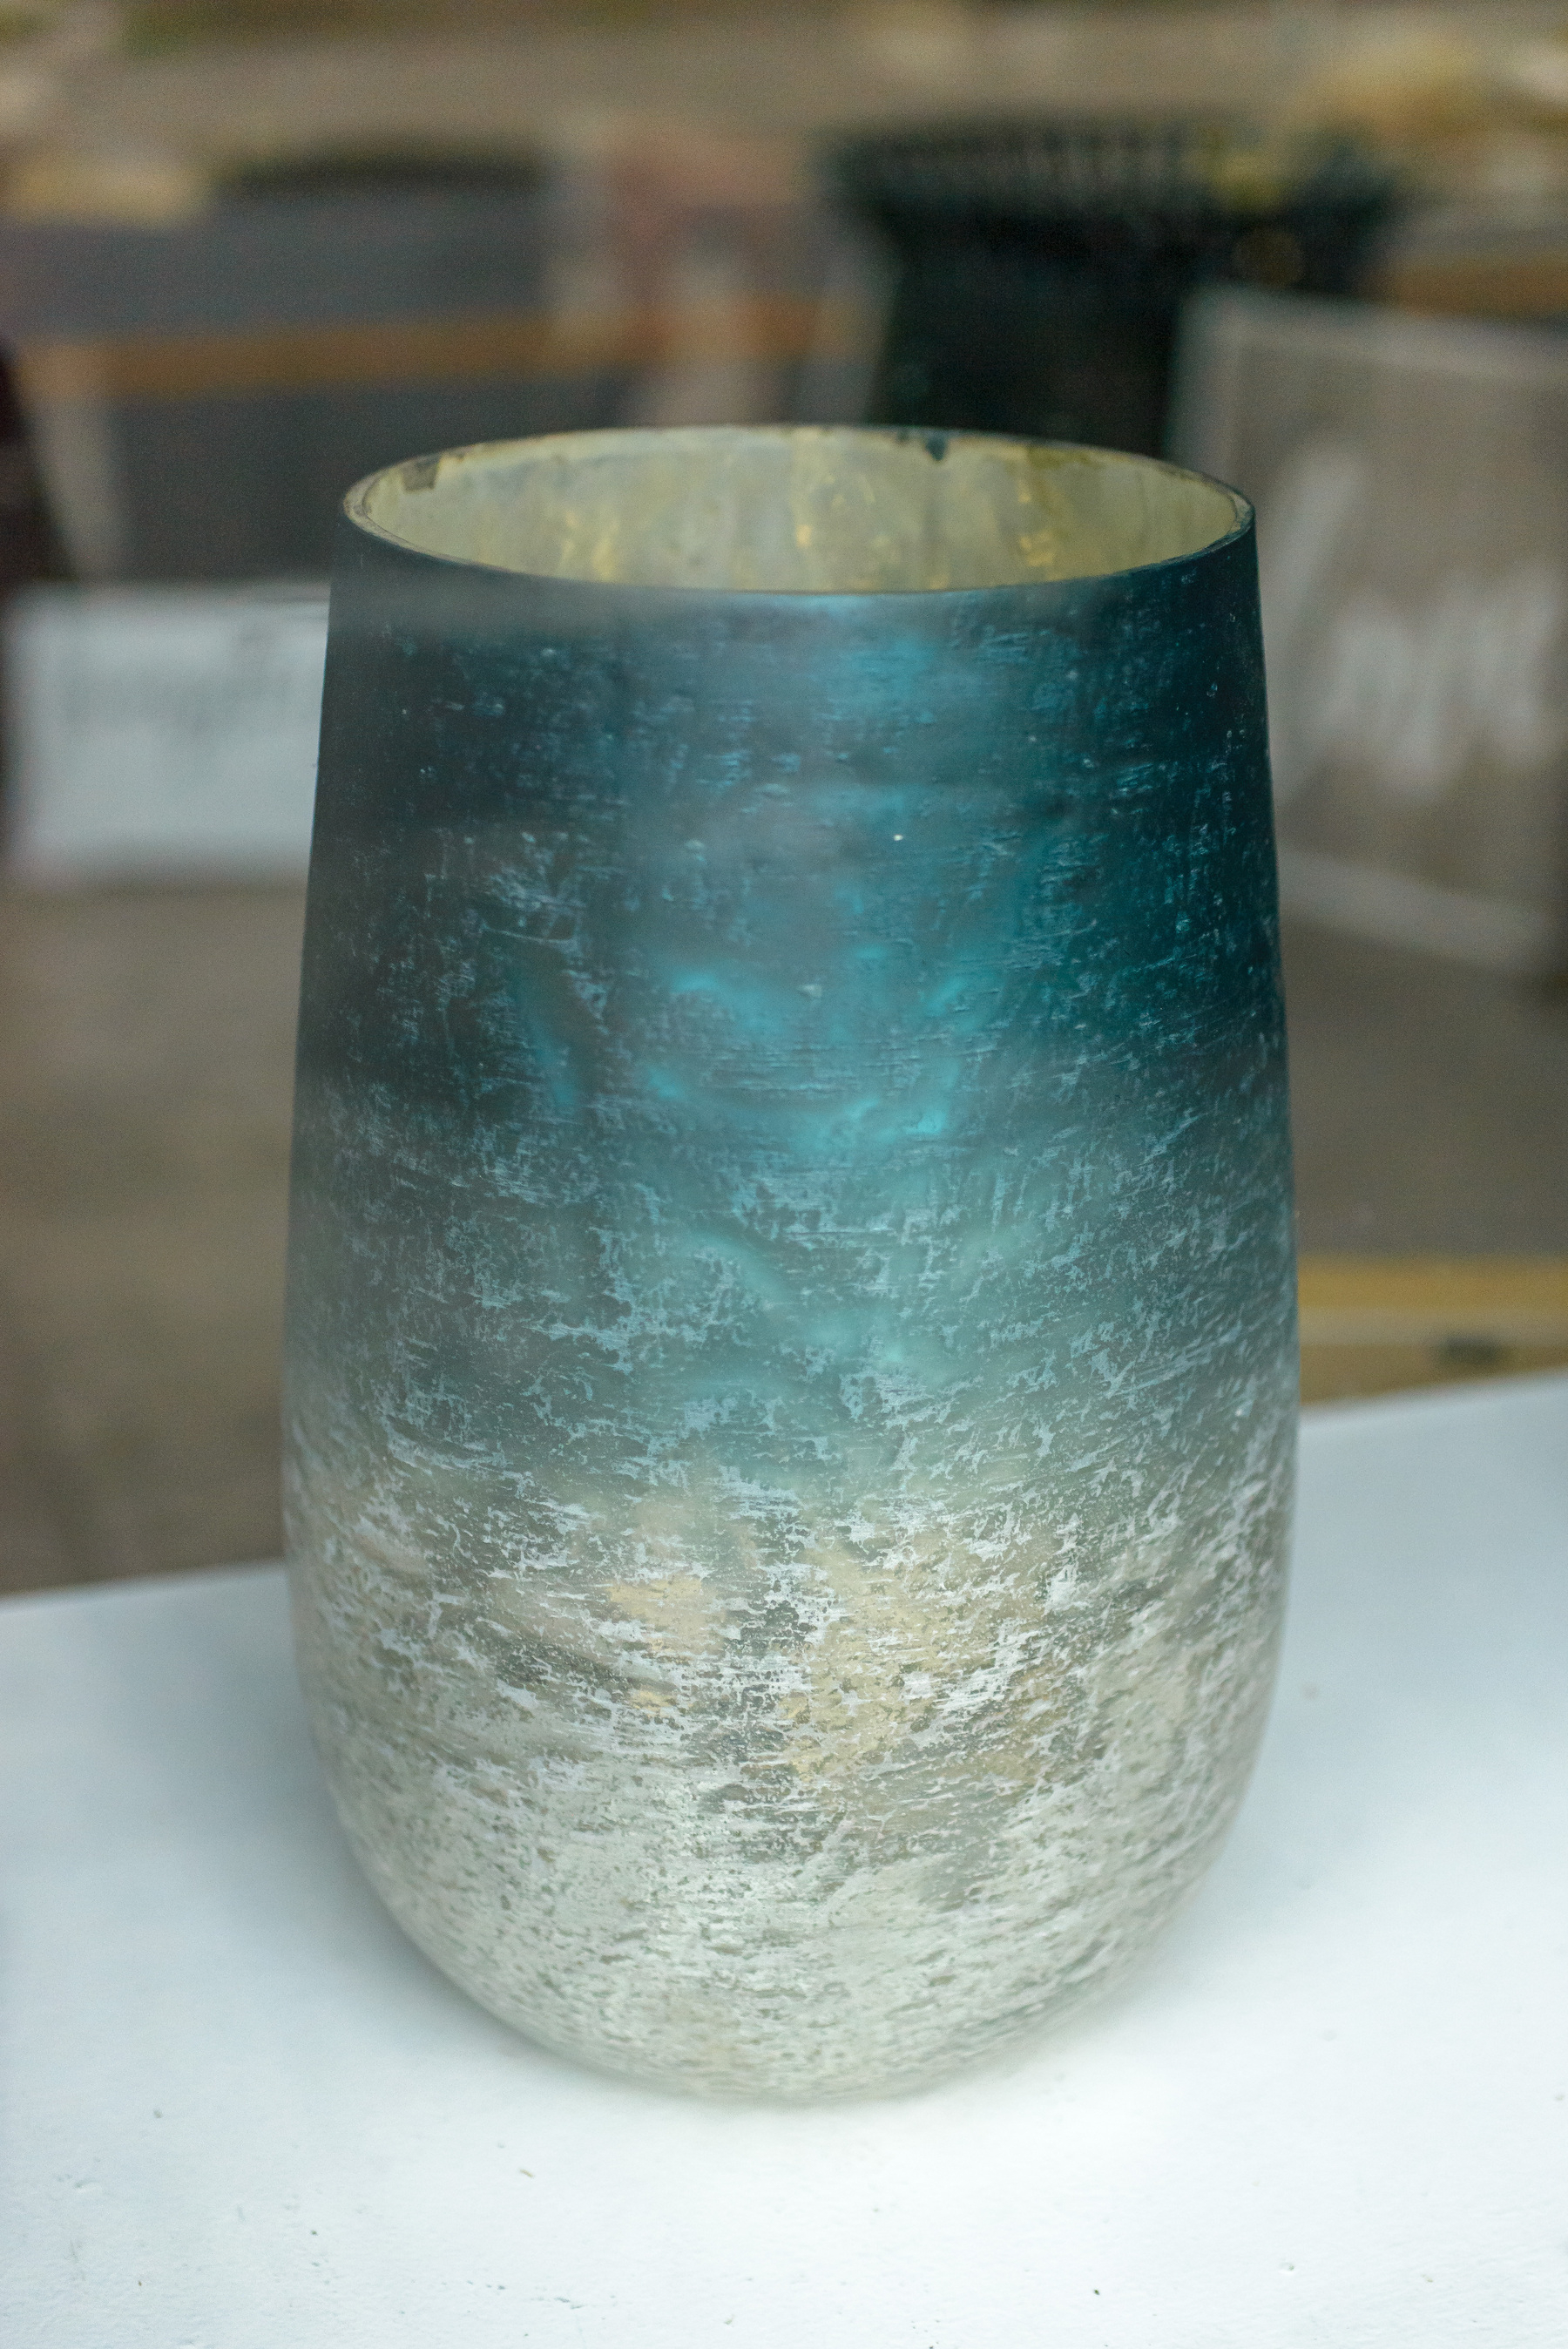 Glass antique vase in a shop window with reflective silver inside and a gradation of dark to light turquoise green from top to bottom. Vase is circular with sides widening out uniformly two thirds of the way down, then gently curving down and in to the narrower base. 